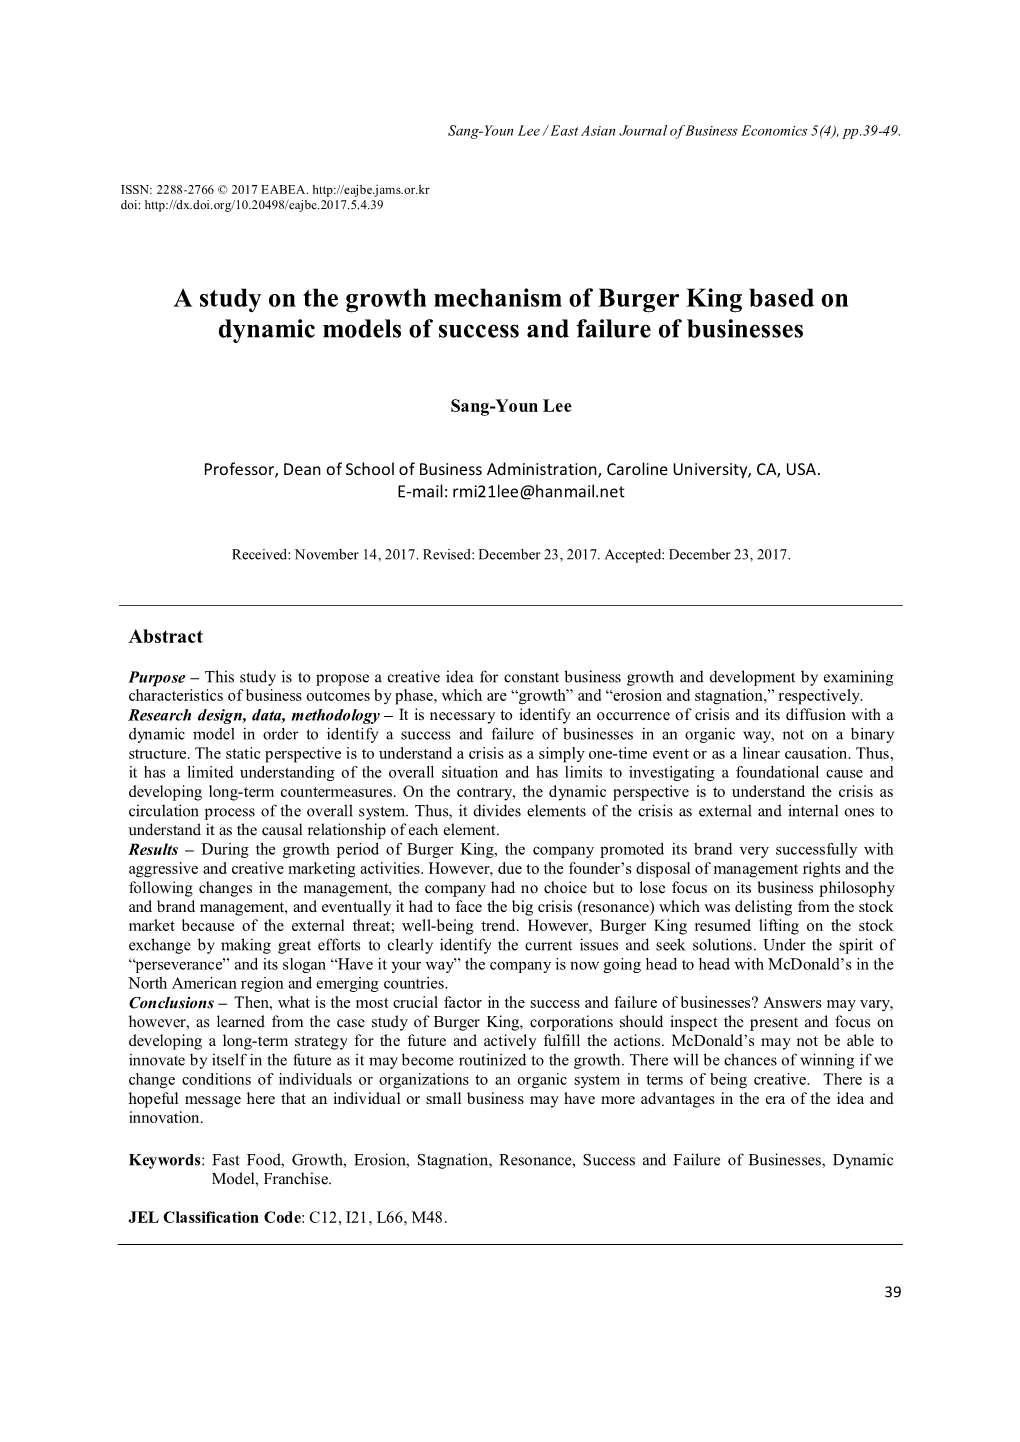 A Study on the Growth Mechanism of Burger King Based on Dynamic Models of Success and Failure of Businesses